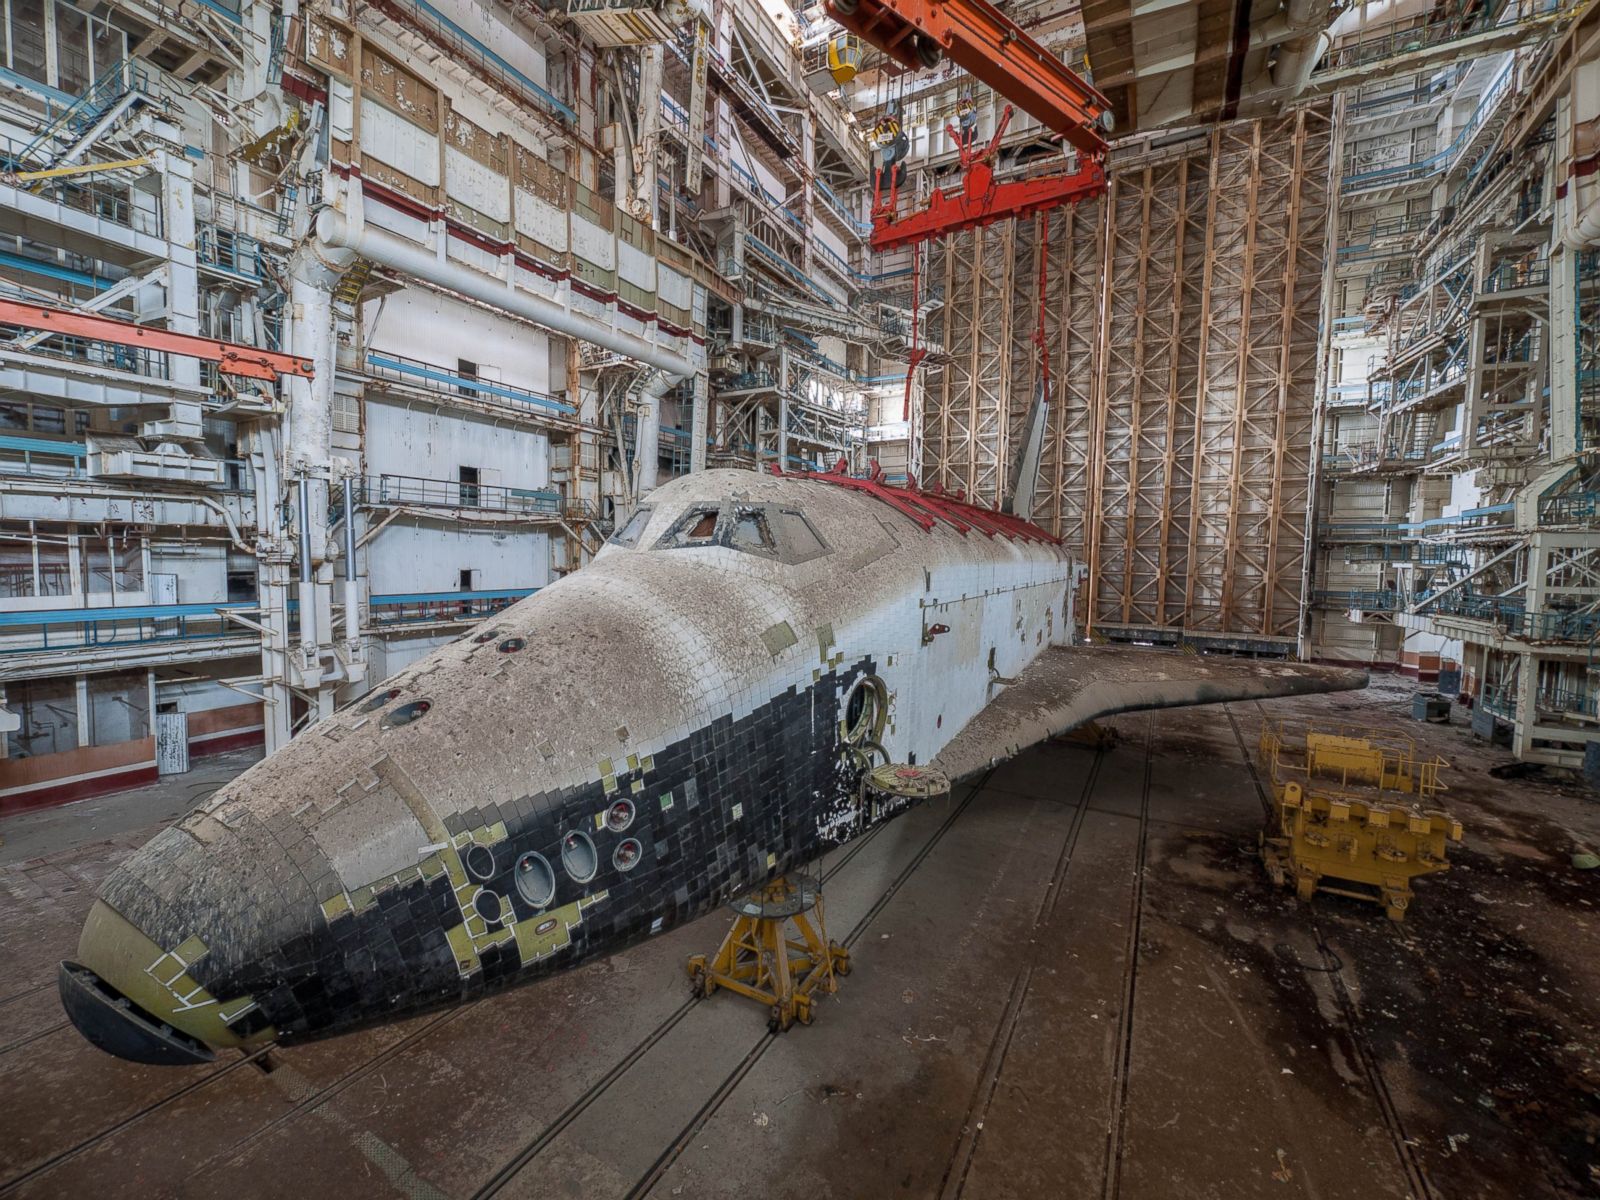 Captivating Photographs Document Soviet Space Shuttles Abandoned in ...